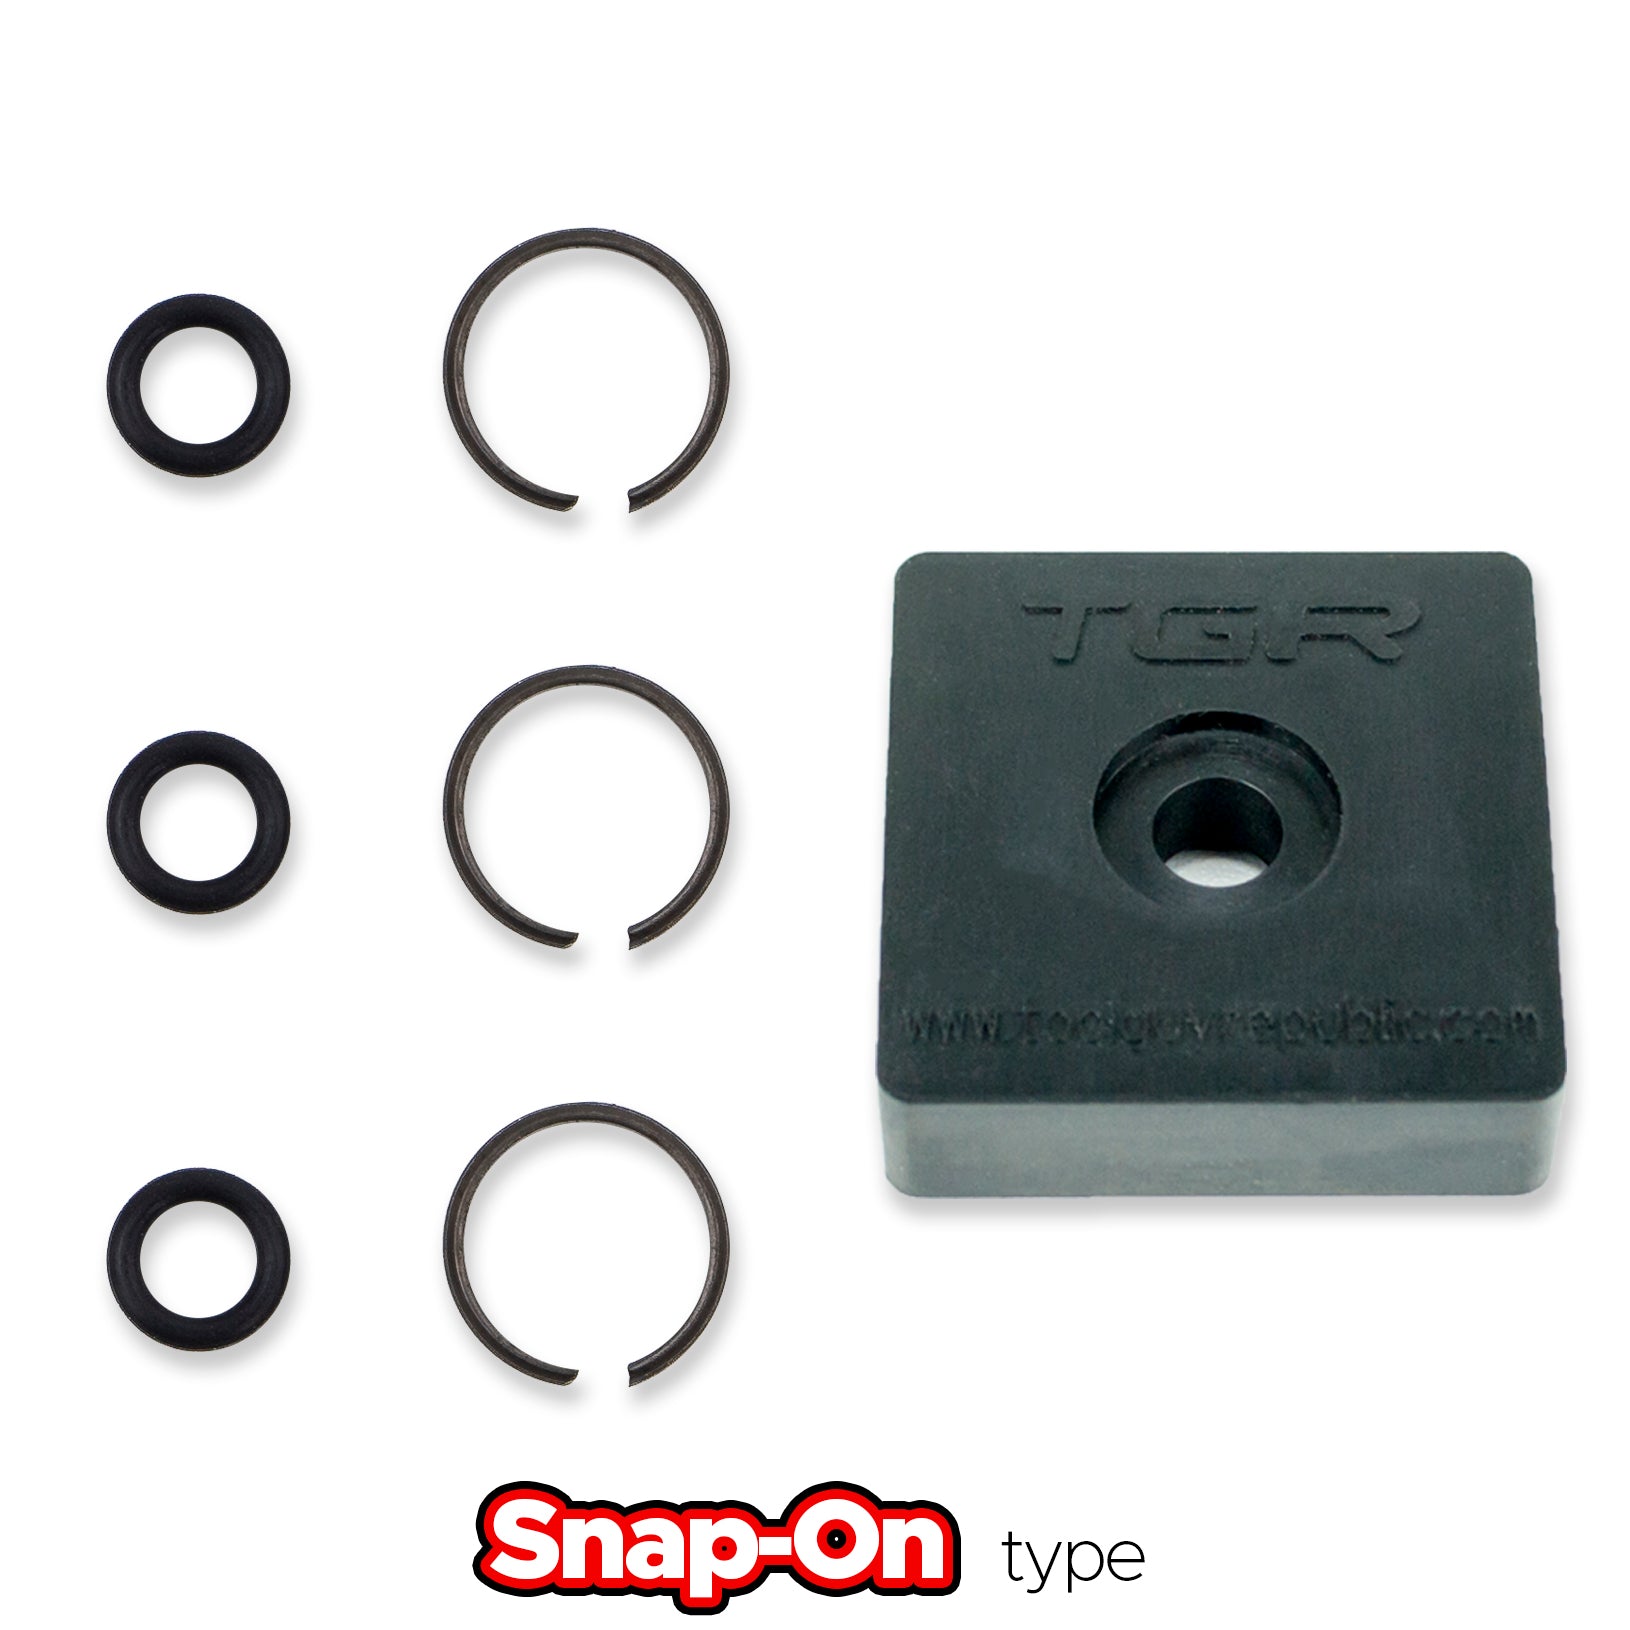 3/8" Impact Wrench Retaining Ring Clip with O-Ring fits Snap-On Type - 3 Sets